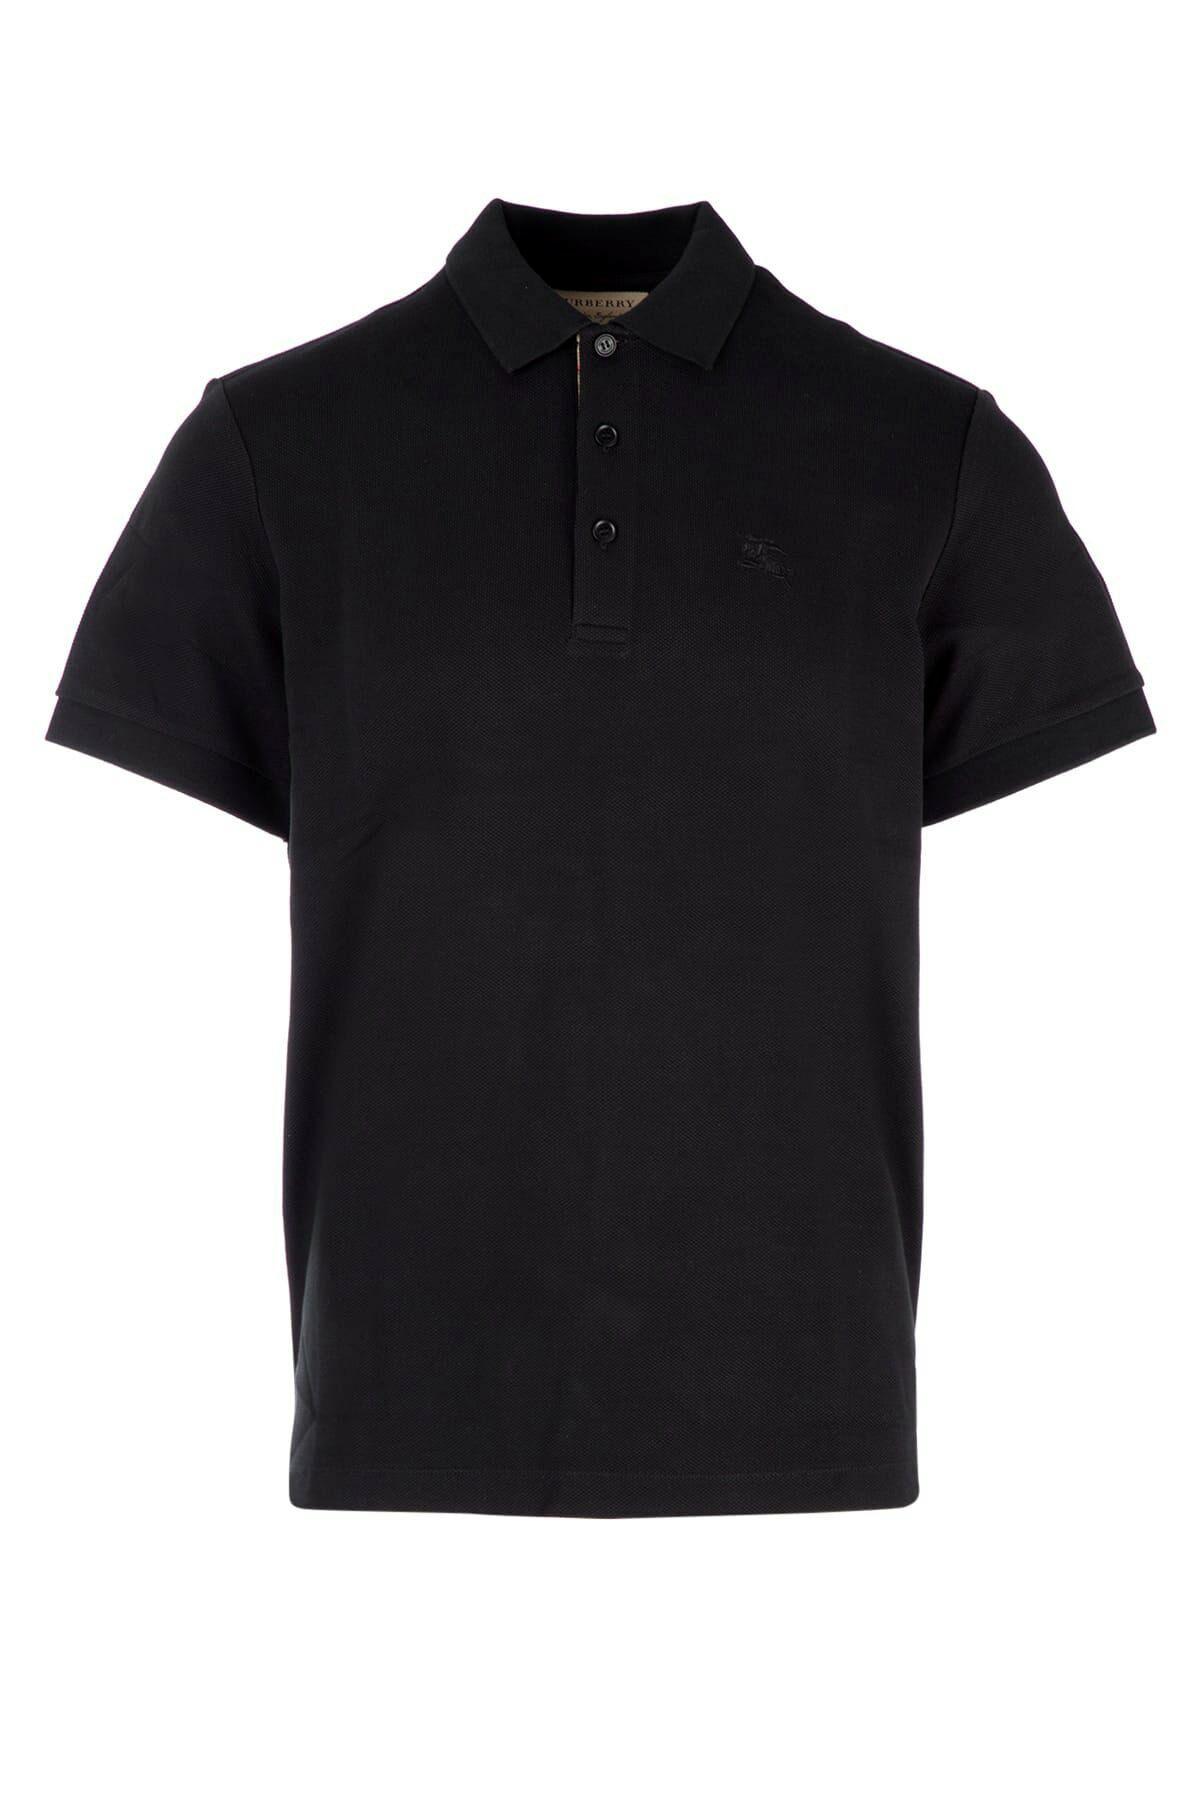 Burberry Black Cotton Polo Shirt in Black for Men - Lyst